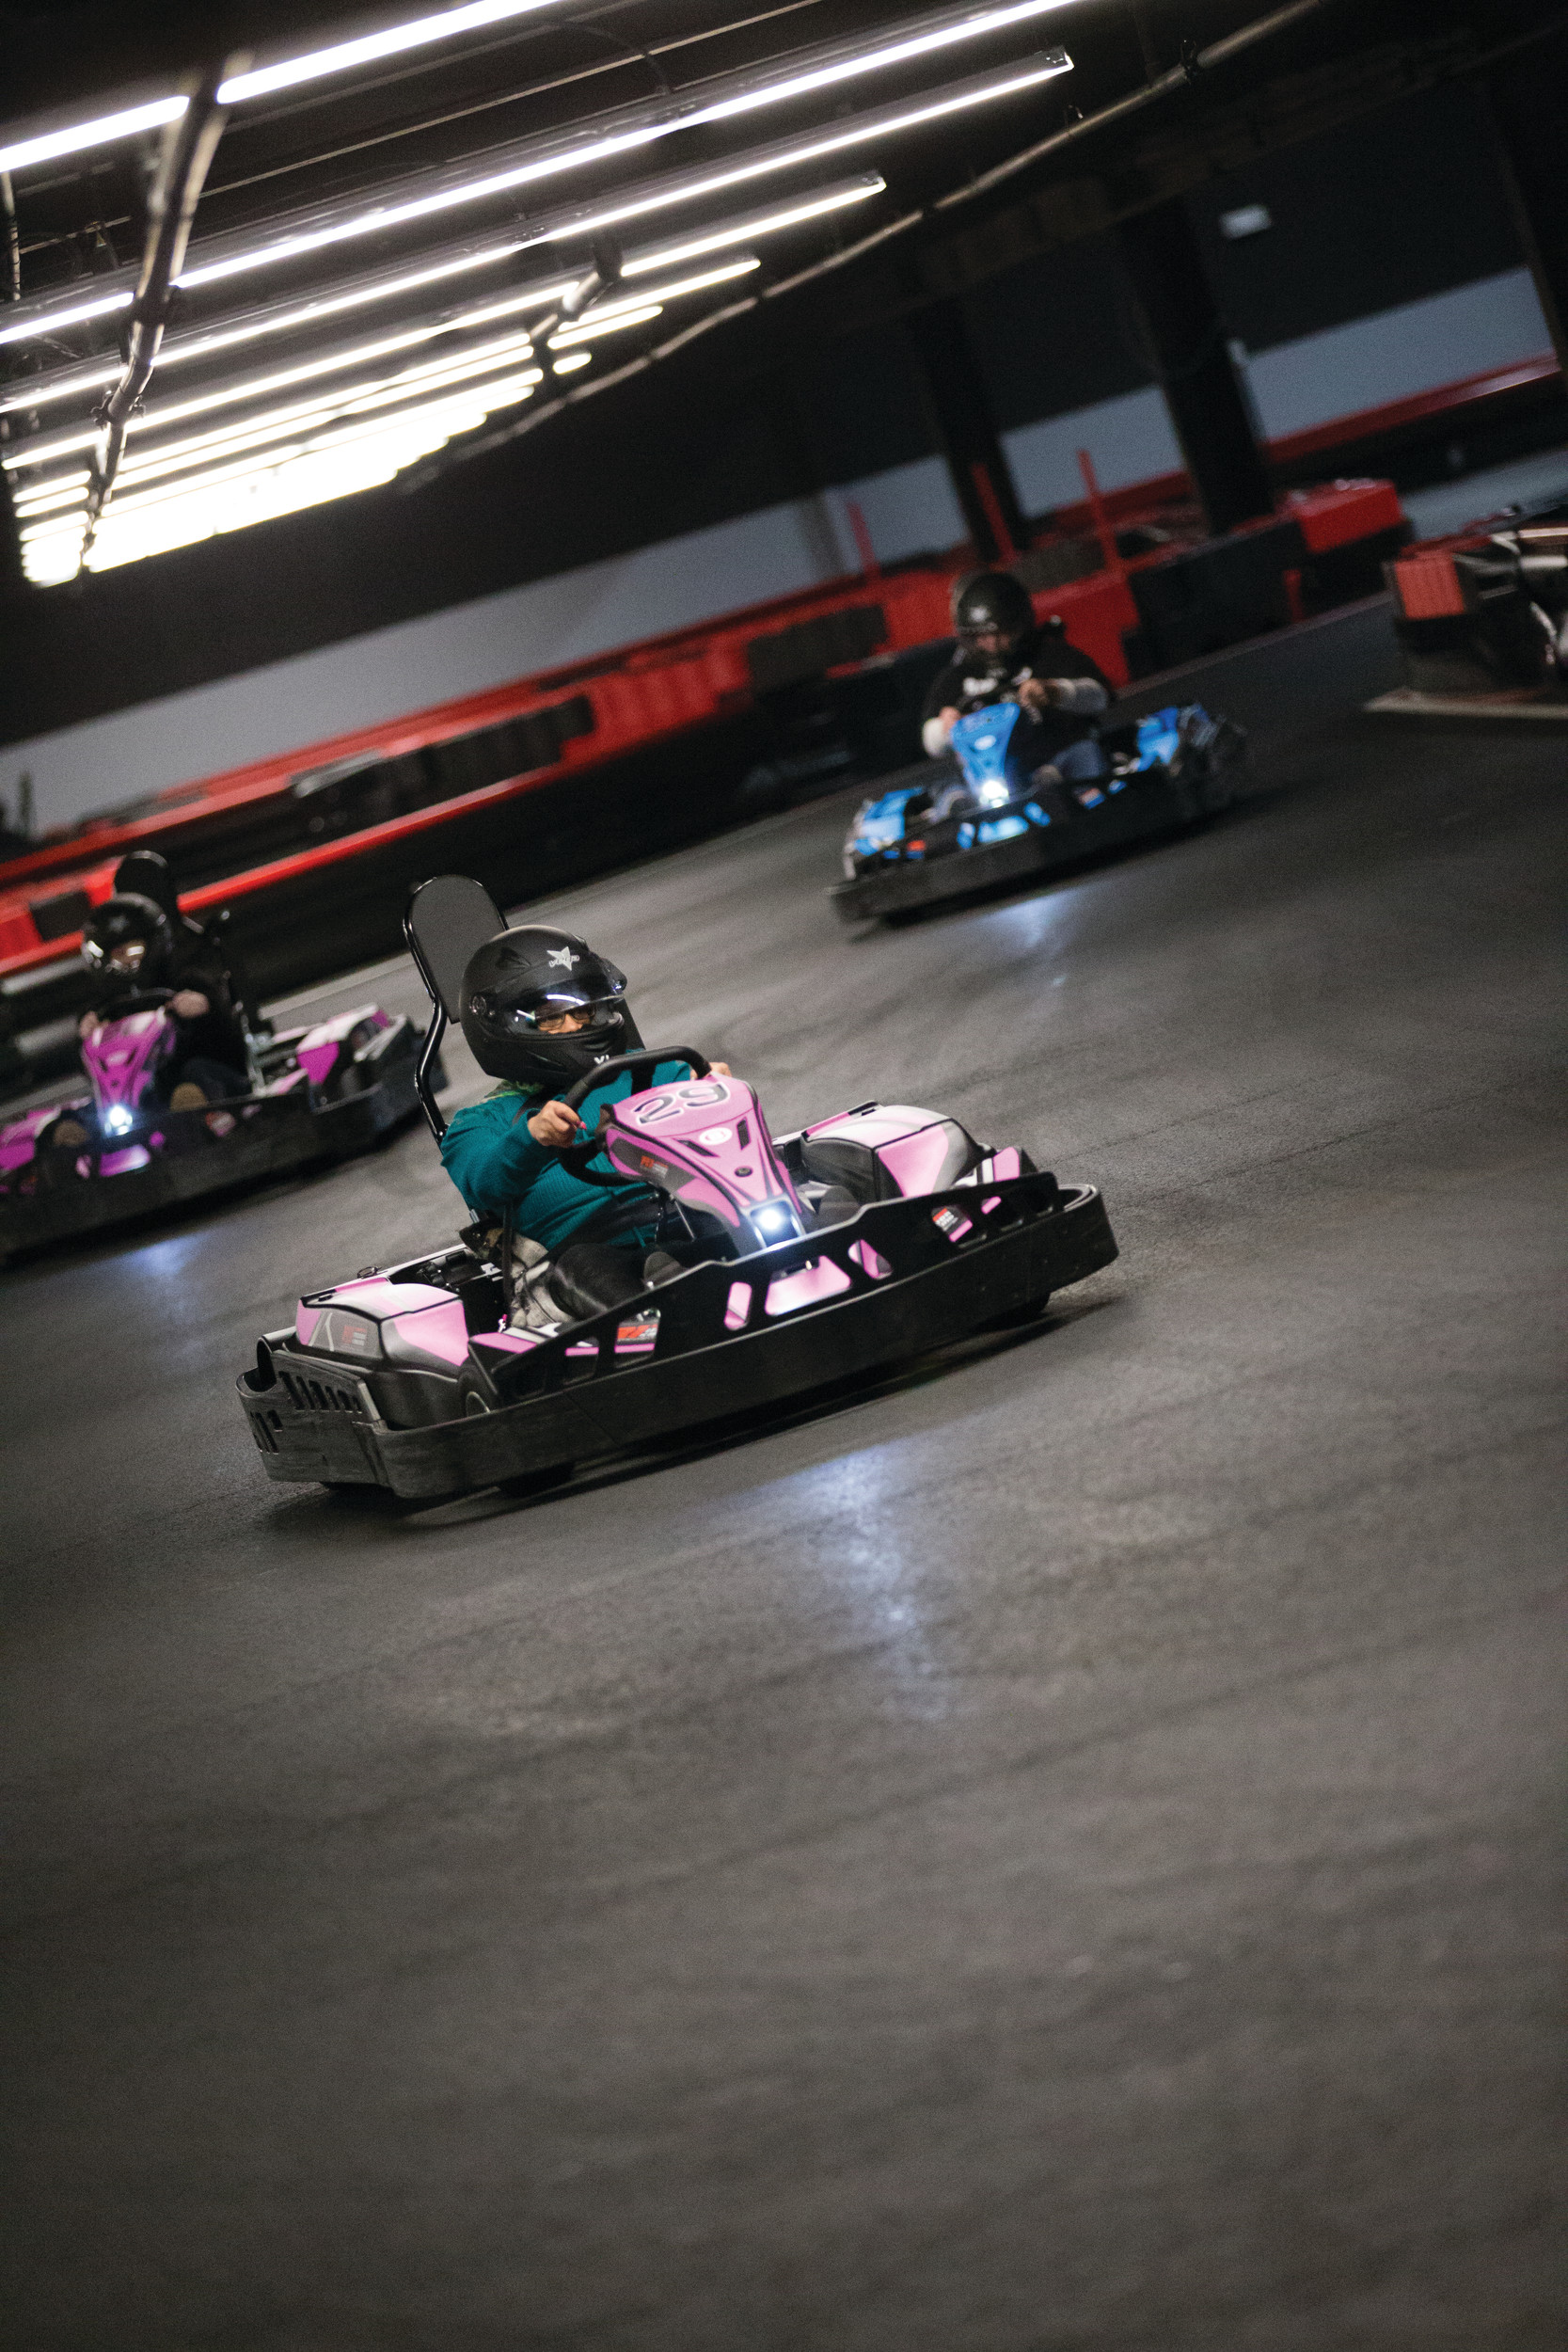 Start your engines and race for glory at R1 Indoor Karting